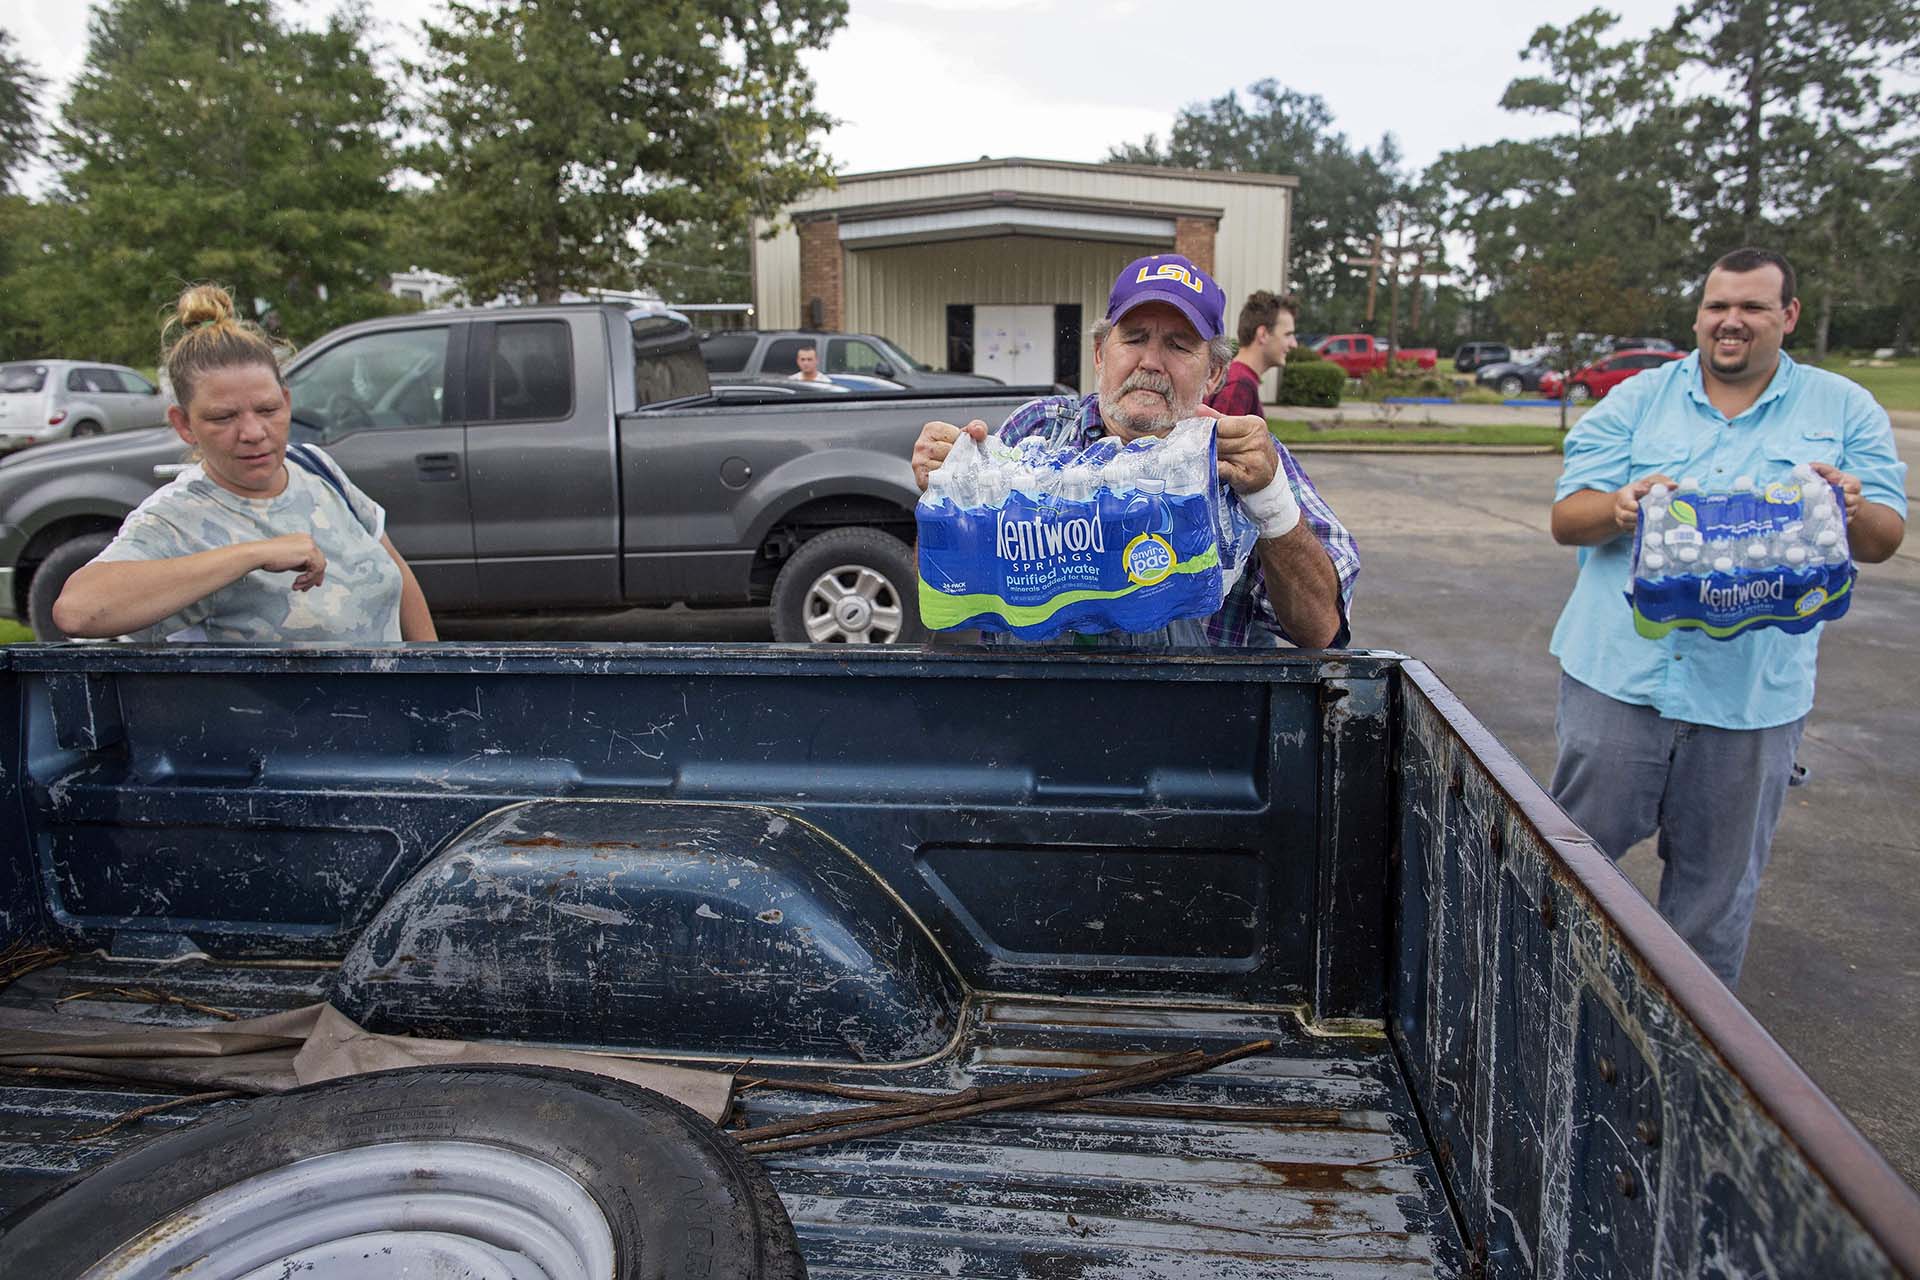 Robert Miller, 66, center, and Matt Decker, 33, right, loads water in the pickup of flood surviver Dawn Hay, 40, at South Walker Baptist Church in Walker, La., Sunday, Aug. 21, 2016. Hay said he is feeding several people taking refuge in her home and needs help supporting them after losing her job because the business closed after the flood. (AP Photo/Max Becherer)